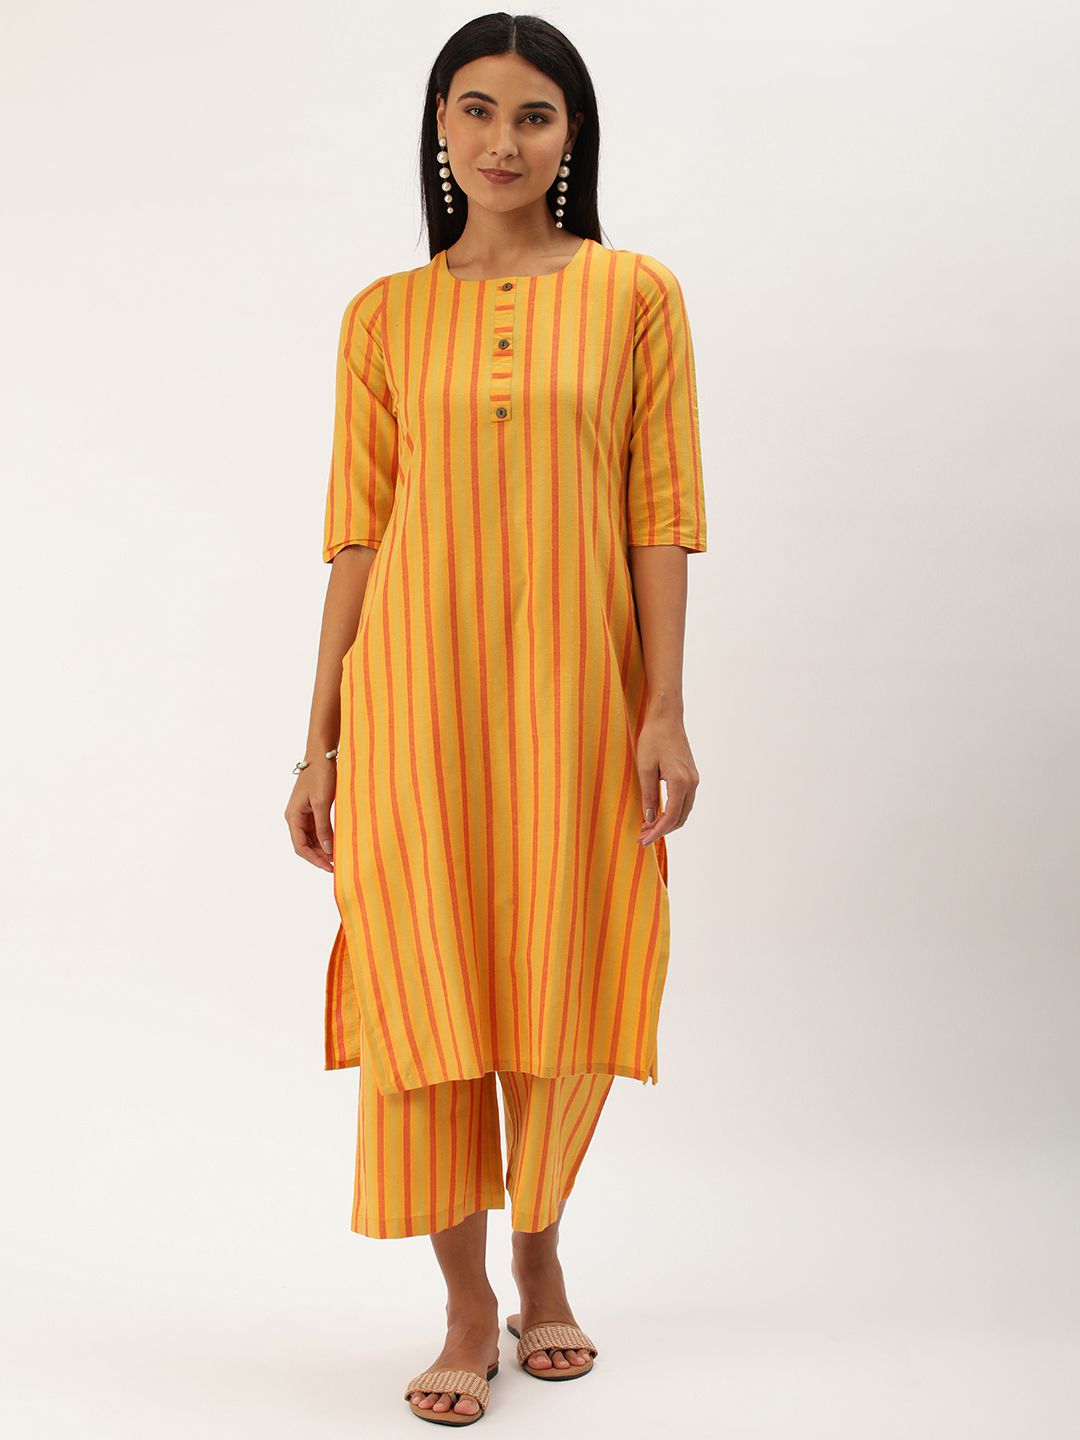     			Aarrah Cotton Striped Kurti With Pants Women's Stitched Salwar Suit - Yellow ( Pack of 1 )